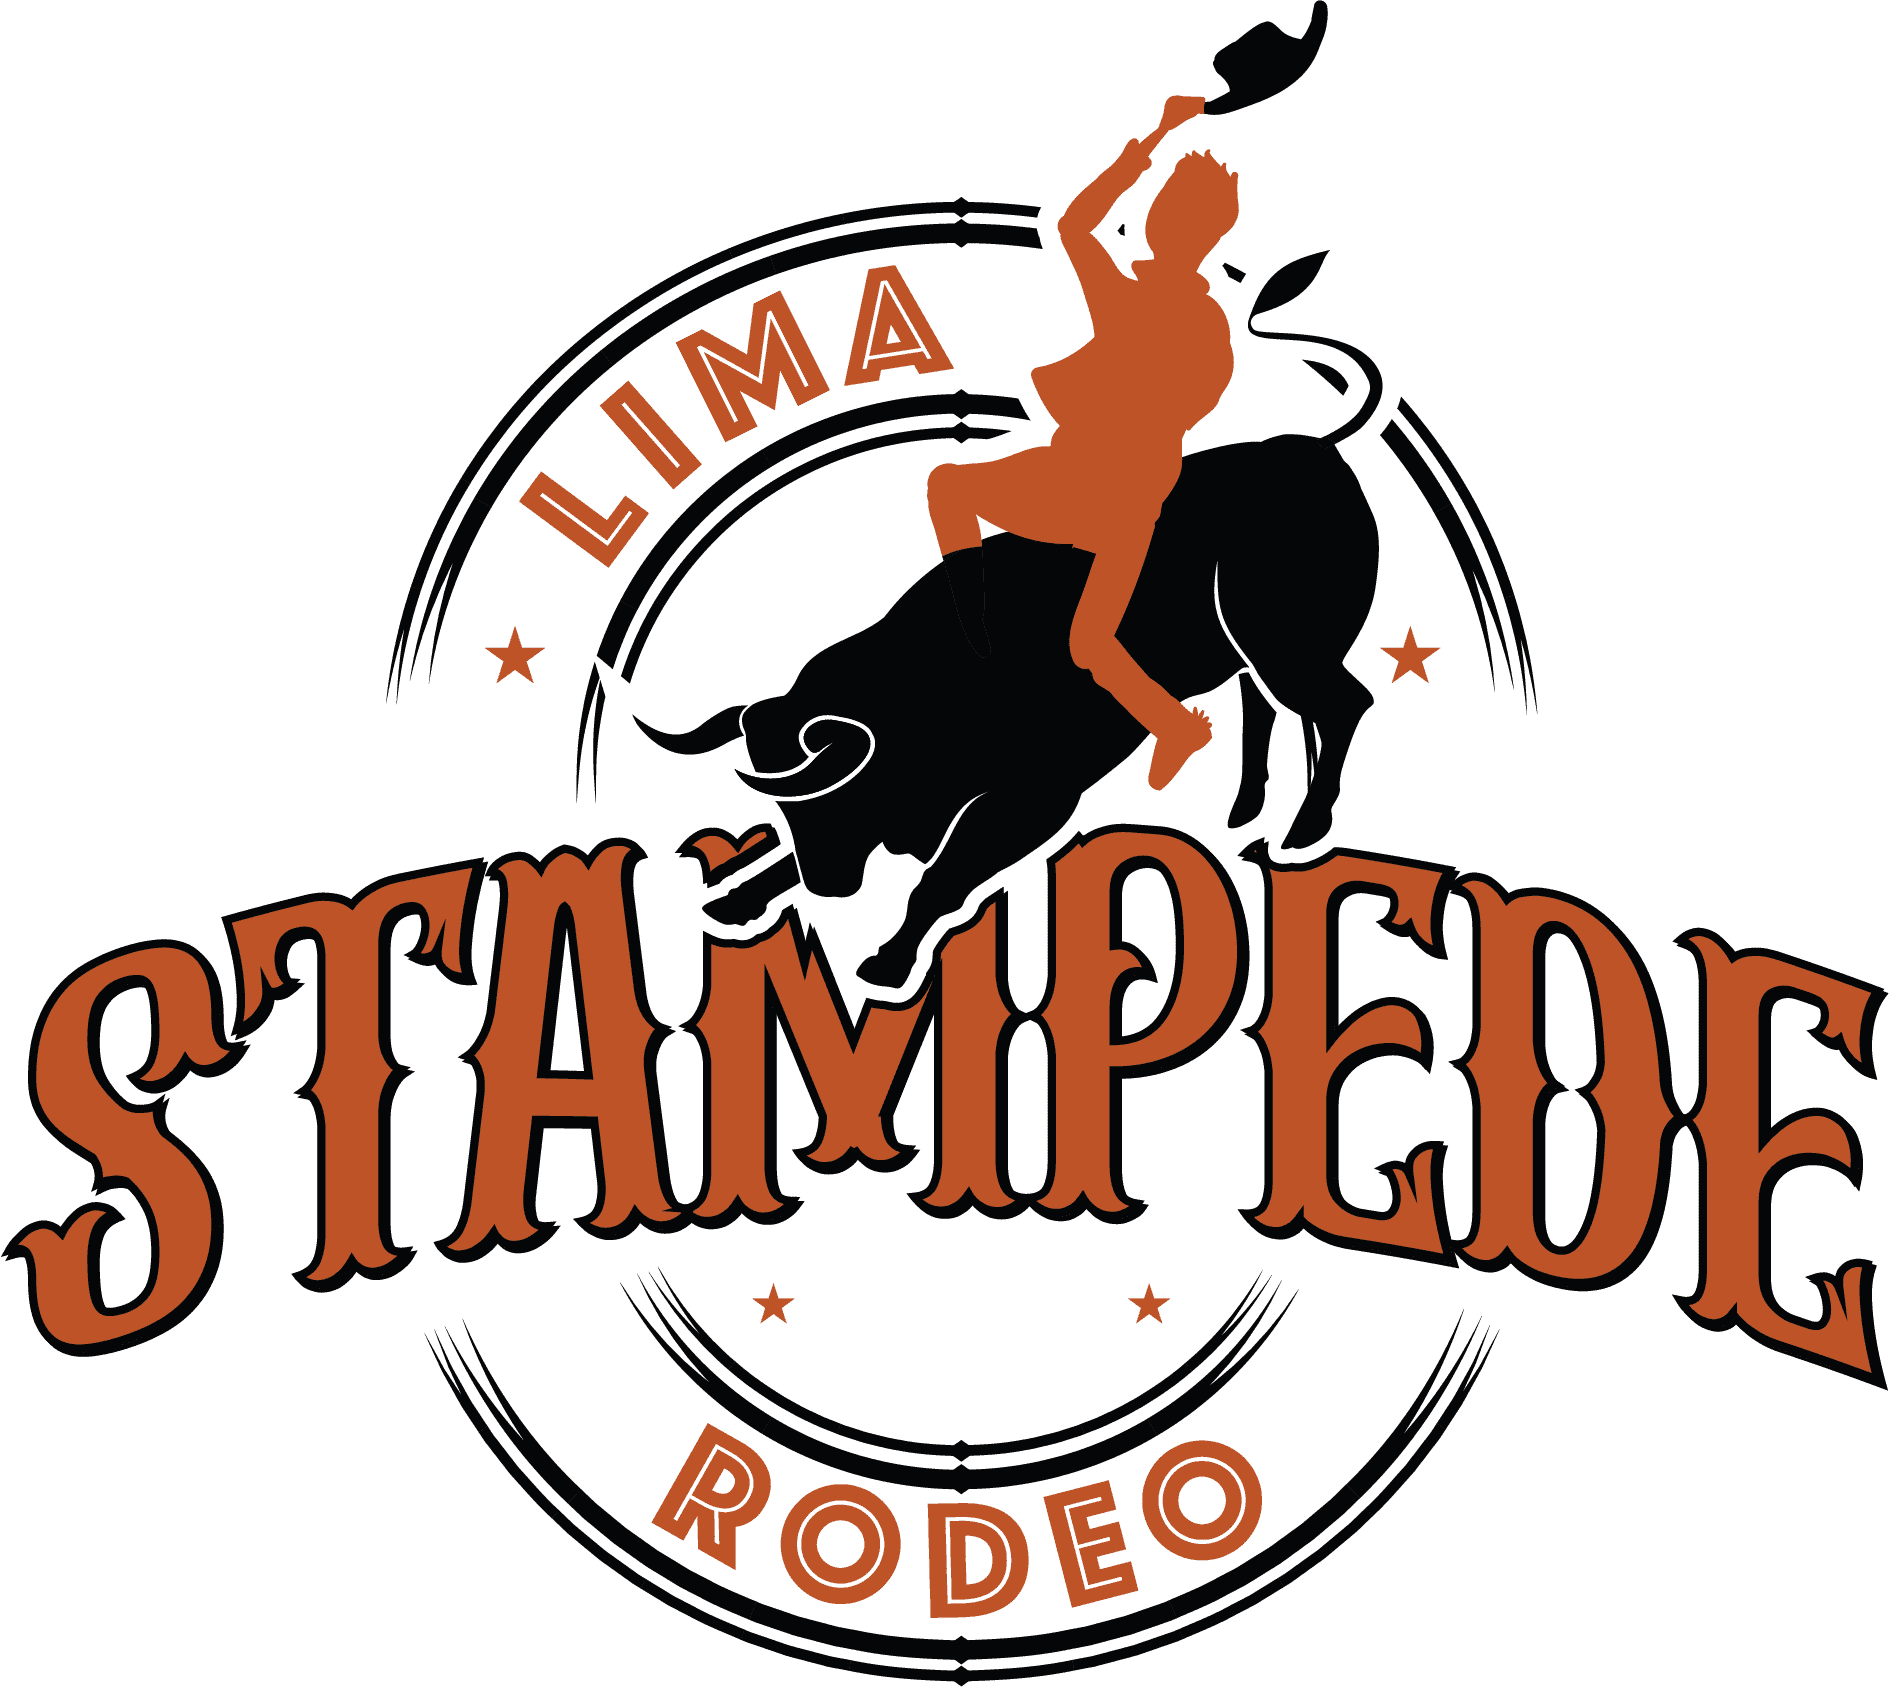 Lima Stampede Rodeo